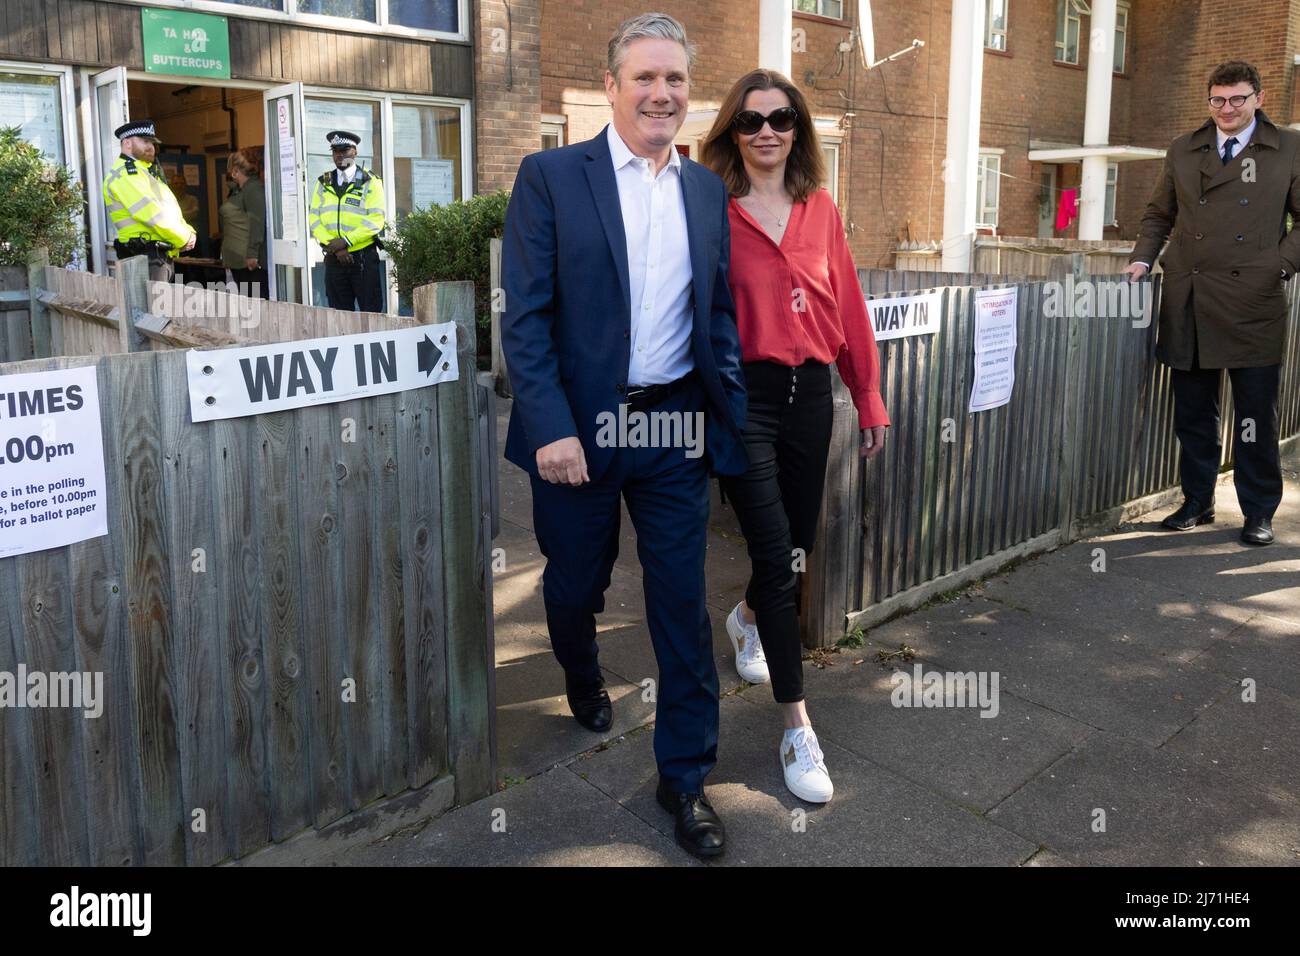 London, UK. 5th May 2022. (220505) -- LONDON, May 5, 2022 (Xinhua) -- Britain's Labour Party leader Keir Starmer (L) and his wife Victoria Starmer leave a polling station after voting in local elections in London, Britain on May 5, 2022. Polling stations across Britain opened early Thursday as voters went for local elections. (Photo by Ray Tang/Xinhua) Credit: Xinhua/Alamy Live News Stock Photo